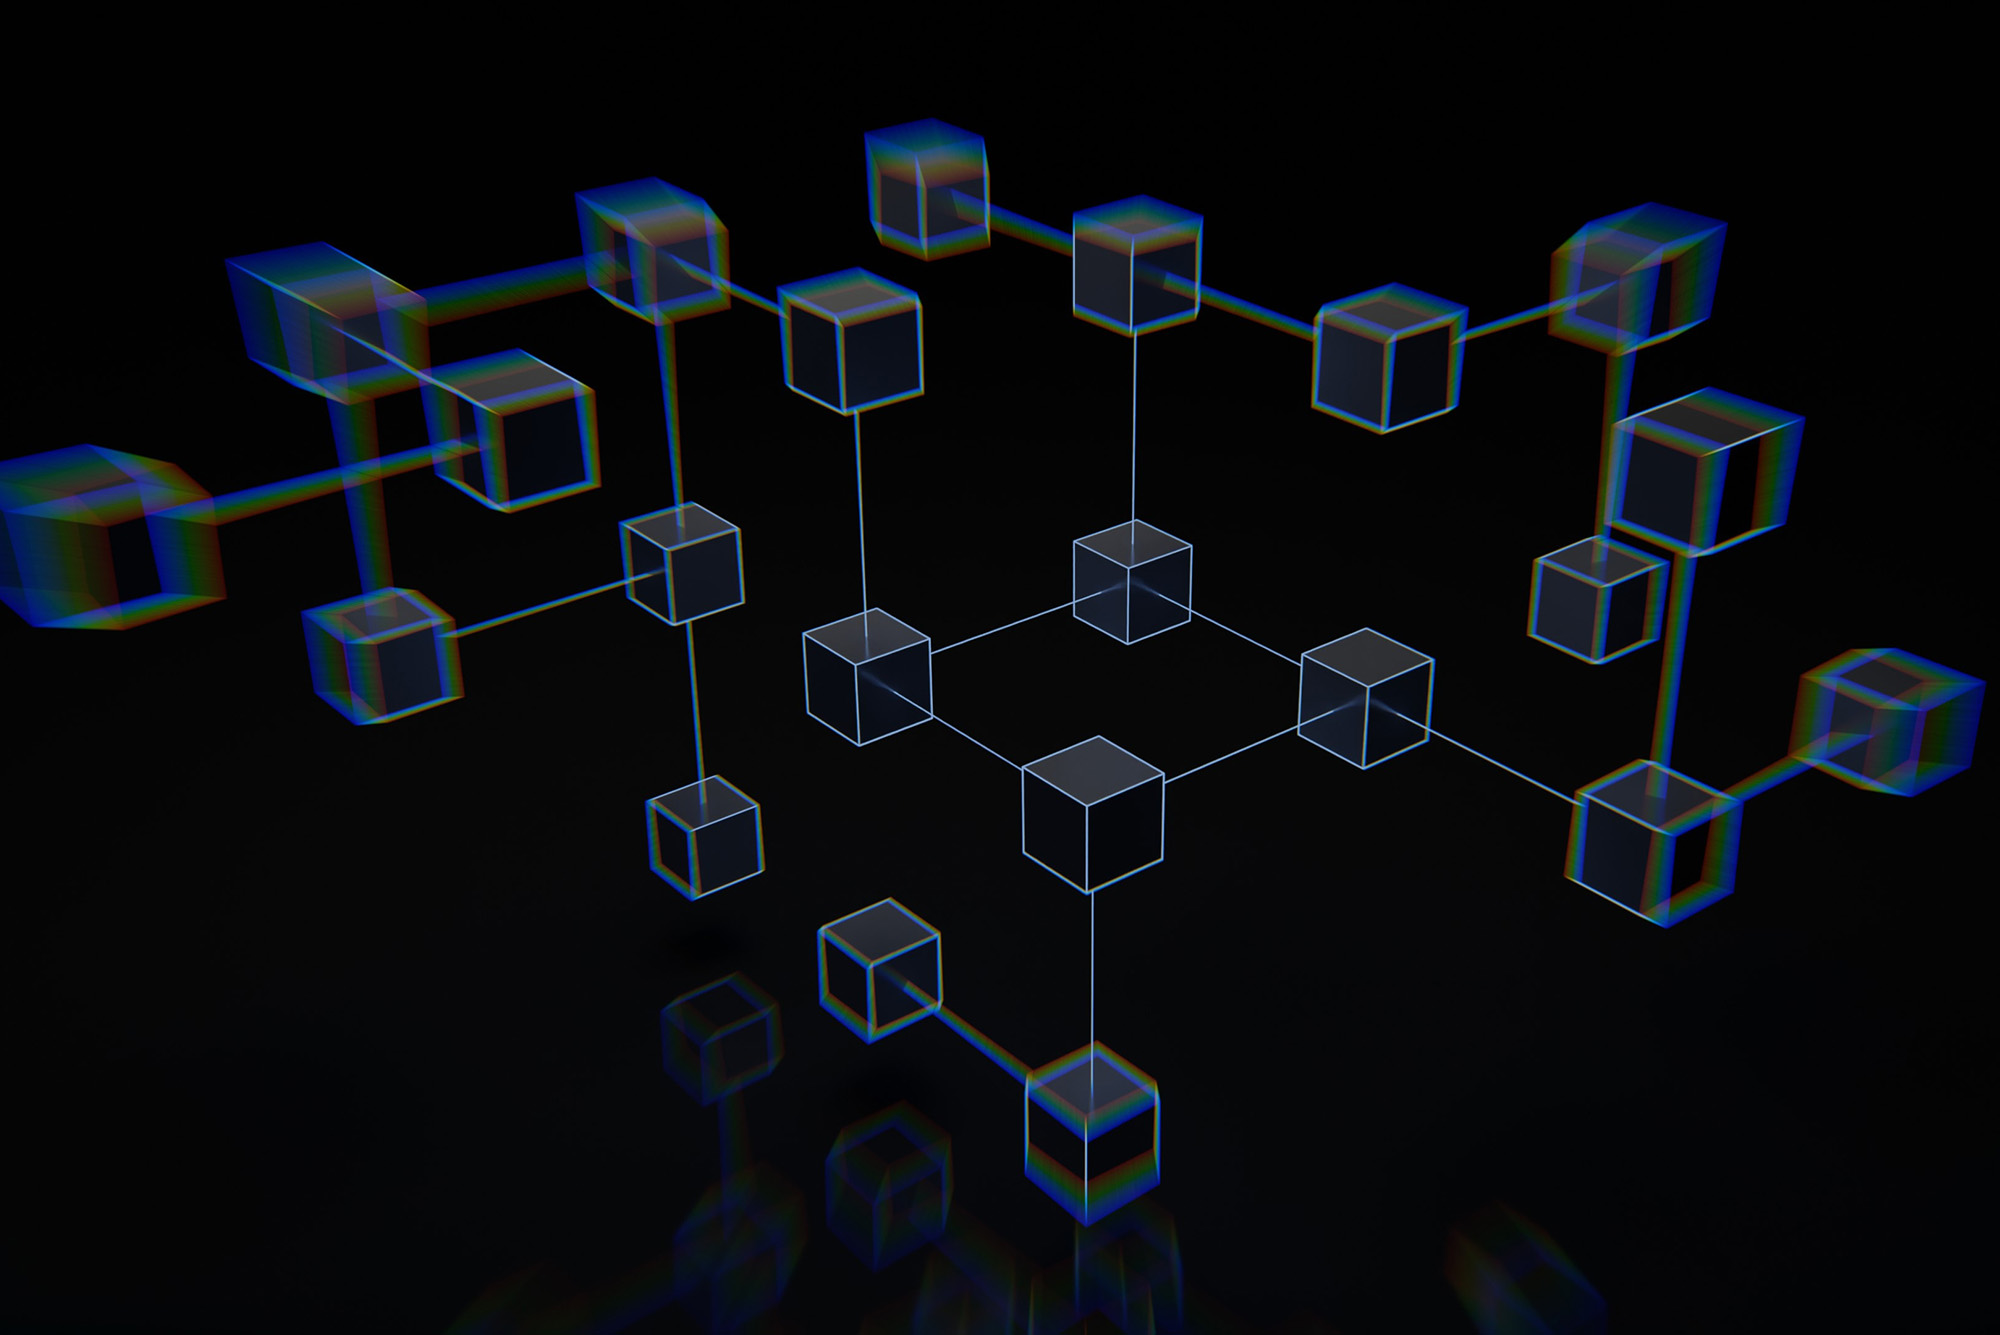 Image: 3d blockchain concept illustration. Blue, connected cubes are connected by various blue lines/chains on a black background.